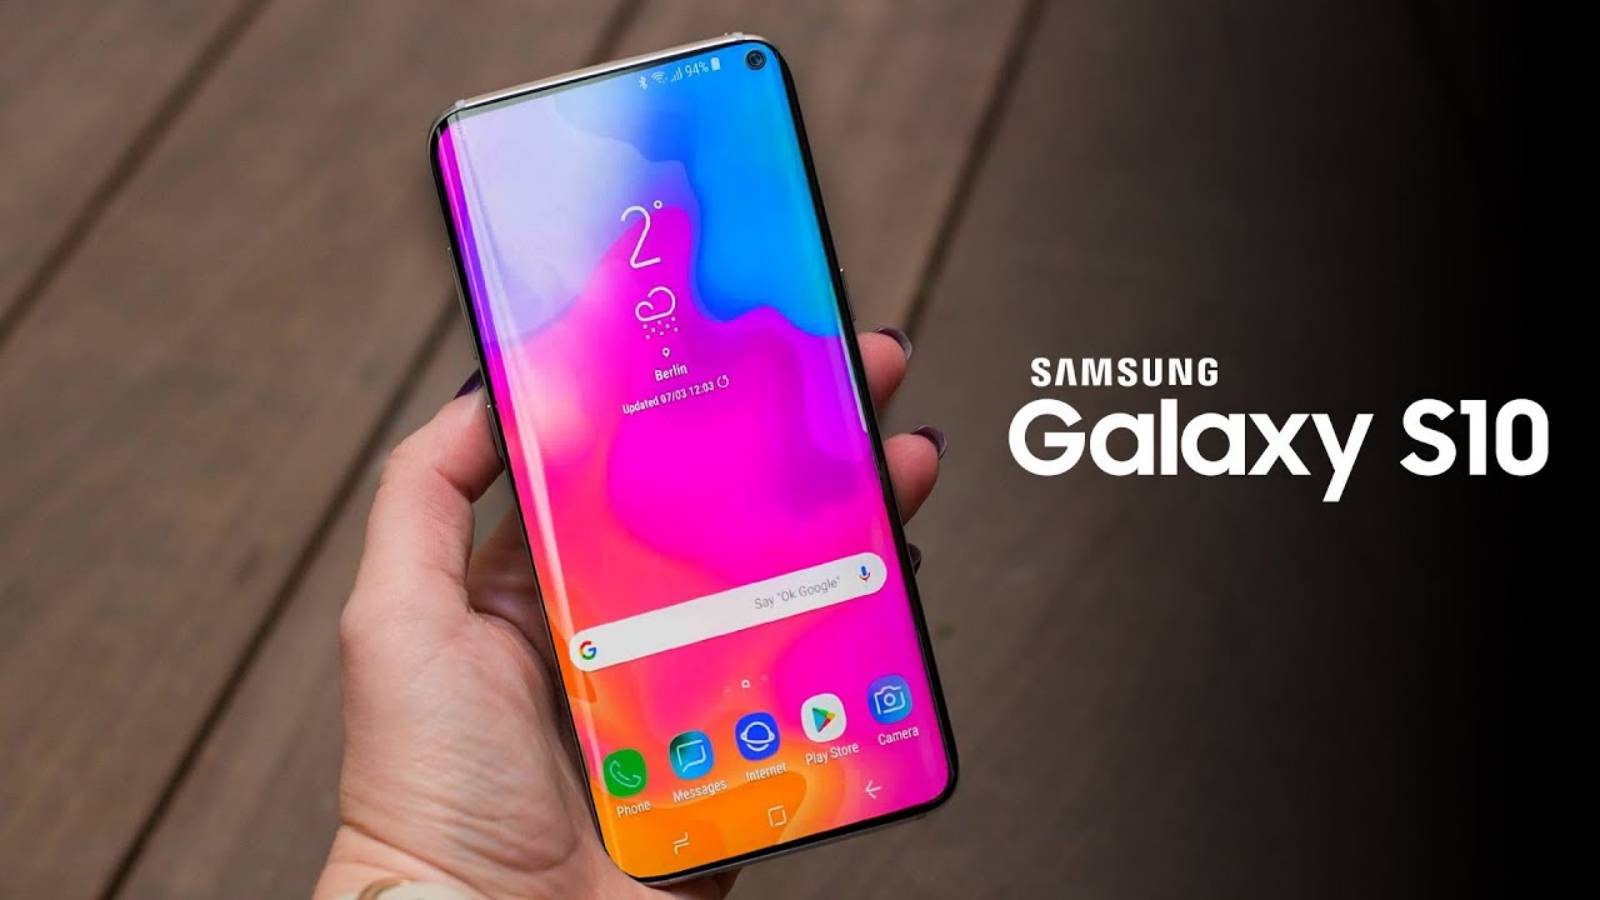 eMAG Samsung GALAXY S10 1500 lei REDUCED price